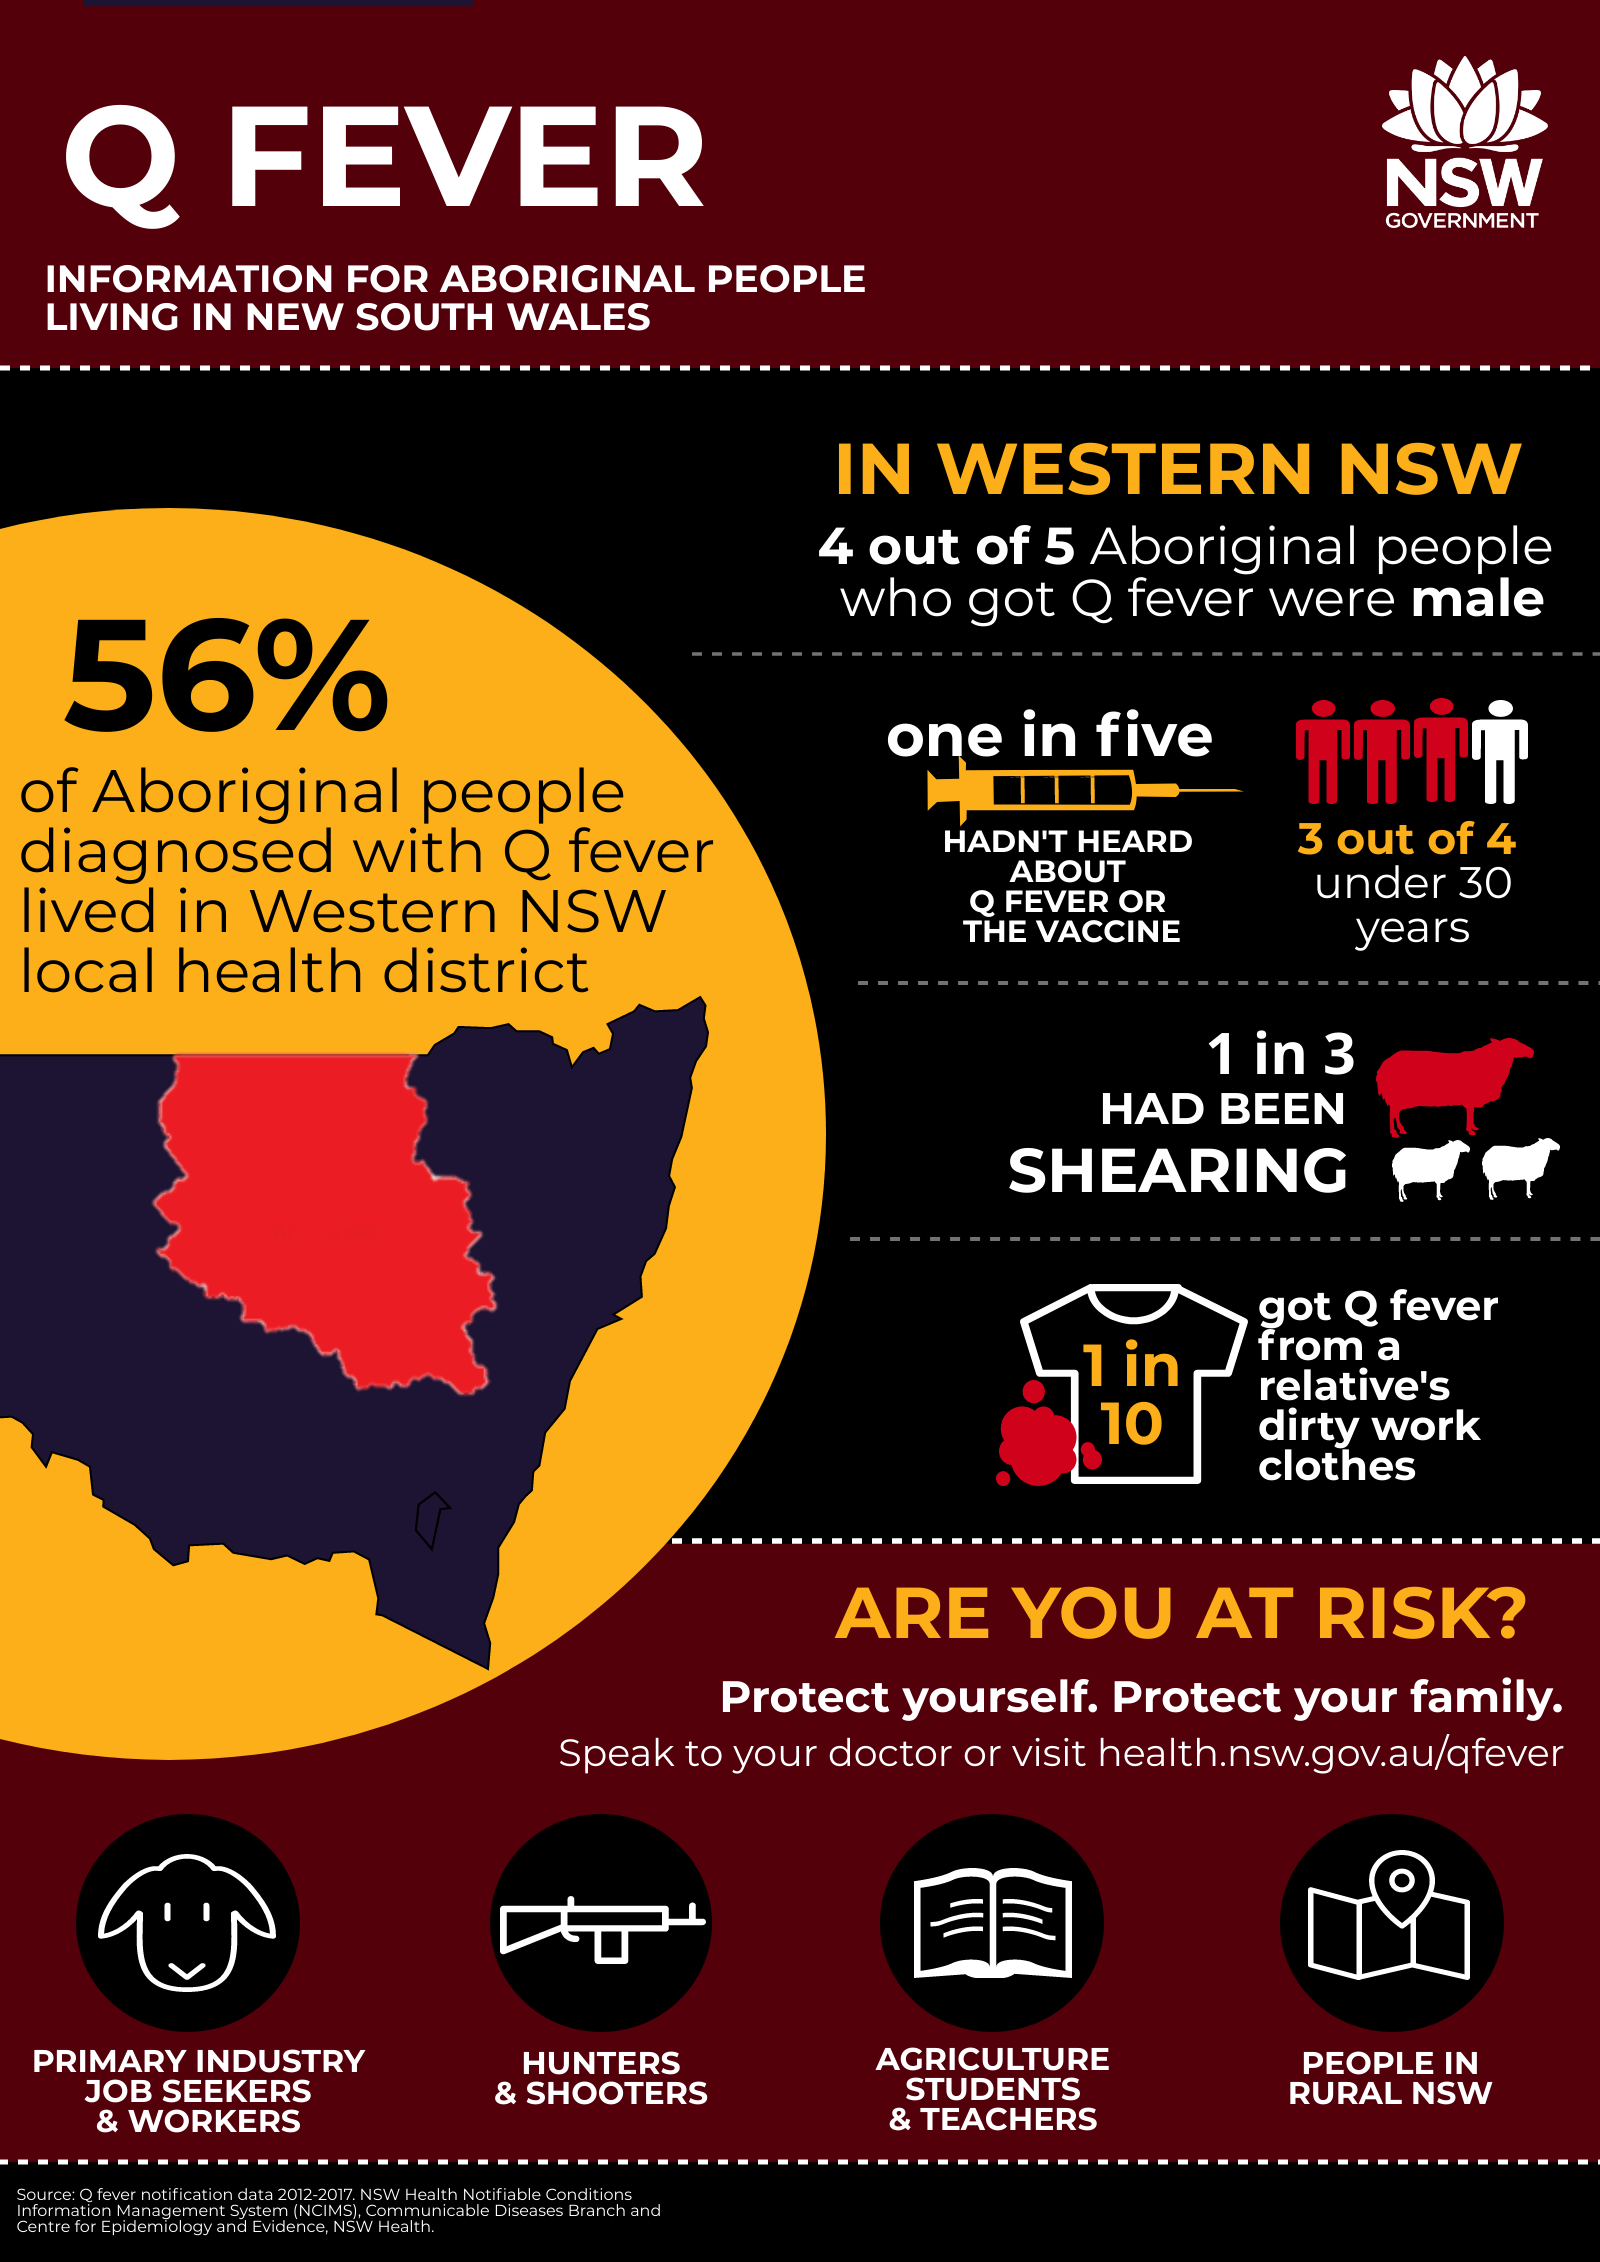 Q Fever - Information for Aboriginal people living in NSW. 56 percent of Aboriginal people diagnosed with Q fever lived in Western NSW Local Health District. In Western NSW 4 out of 5 Aboriginal people who got Q fever were male. One in five hadn't heard about Q fever vaccine. 3 out of 4 were under 30 years. 1 in 3 had been shearing. 1 in 10 got Q fever from a relative's dirty work clothes. Are you at risk? Protect yourself. Protect your family. Speak to your doctor. Especially primary industry job seekers and workers, hunters and shooters, agriculture students and teachers and people in rural NSW.